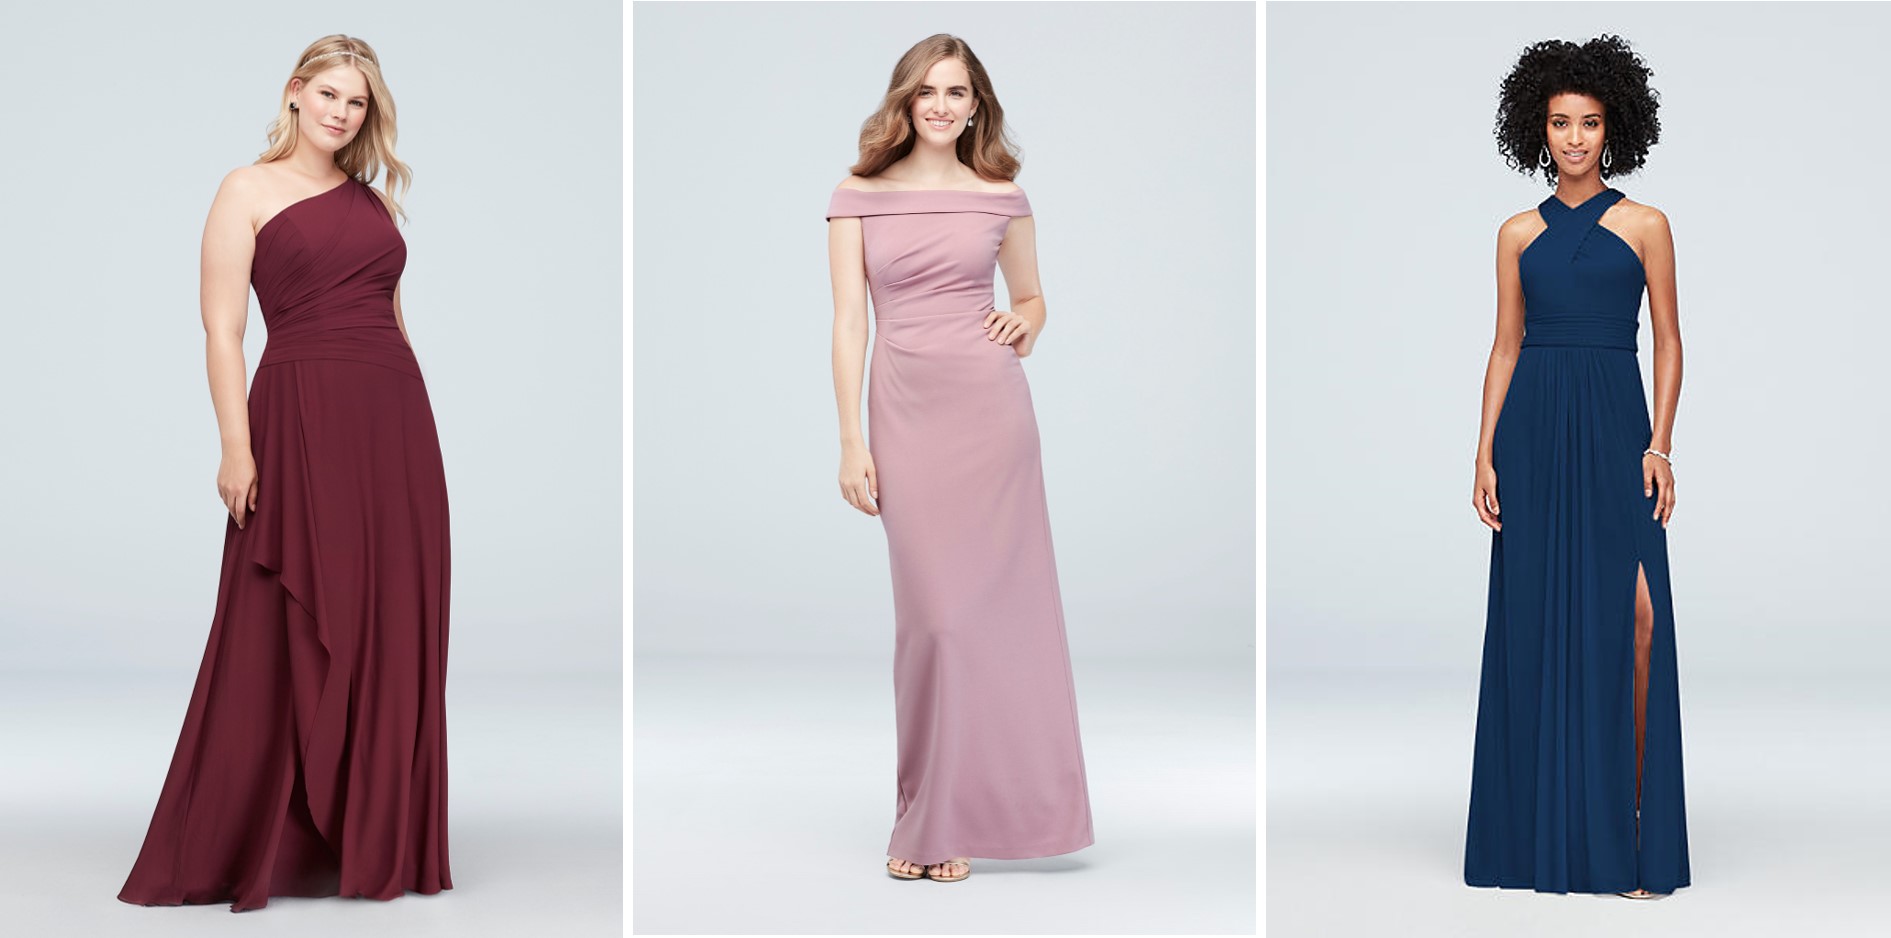 Three bridesmaid dresses on sale during David's Bridal's President's Day Weekend Sale: long one-shoulder chiffon dress with cascading skirt, long off-the-shoulder column dress, and long criss-cross neckline dress with slit in skirt